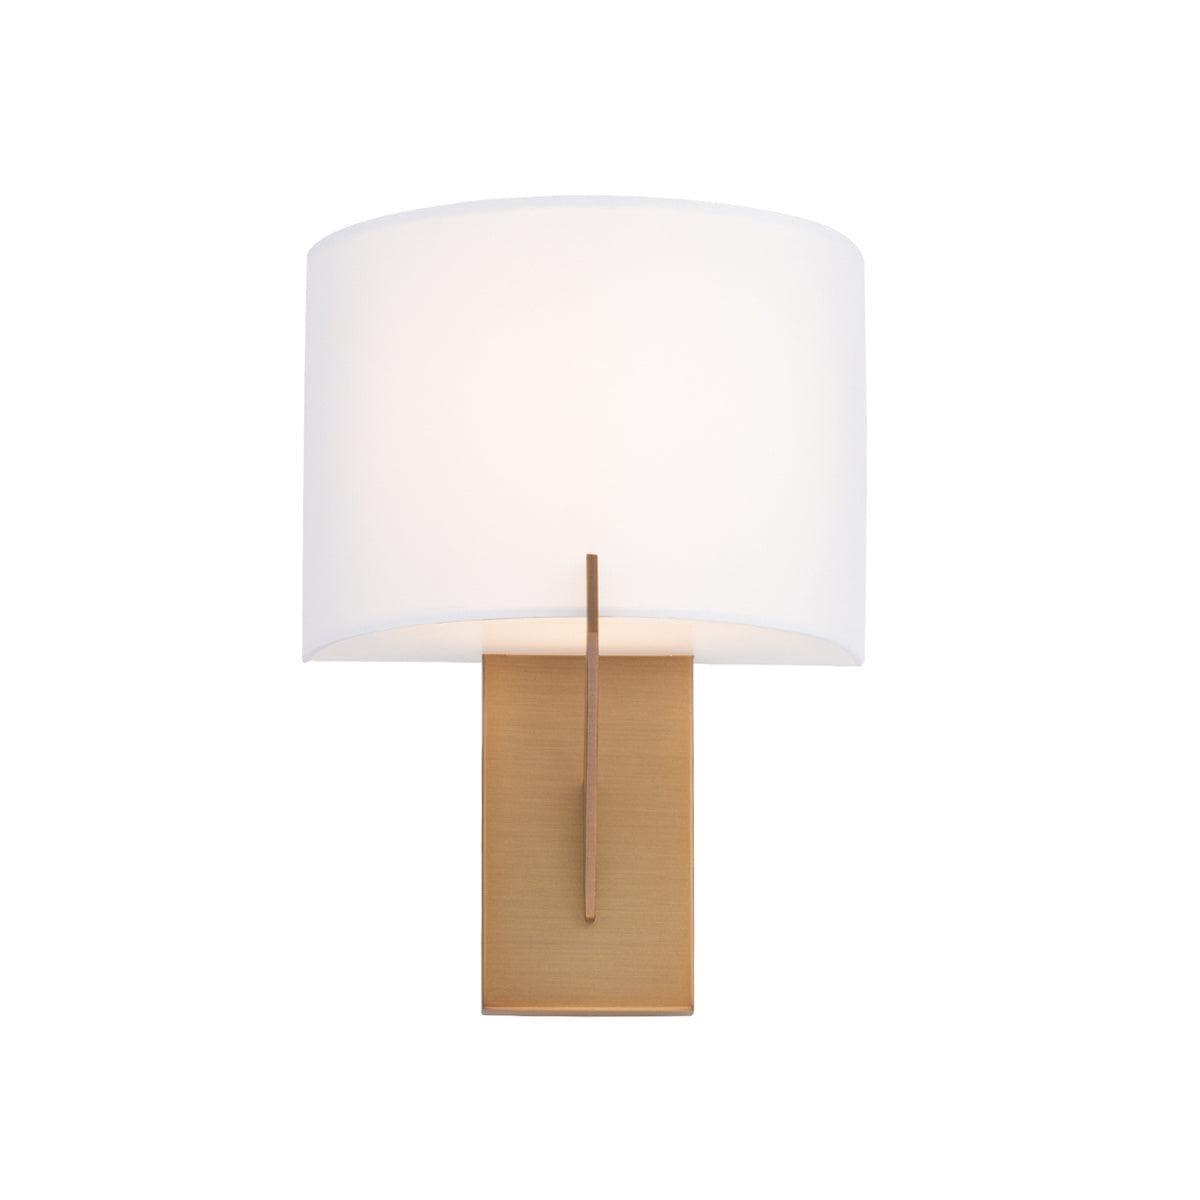 WAC Lighting - Fitzgerald LED Wall Sconce - WS-47108-30-AB | Montreal Lighting & Hardware